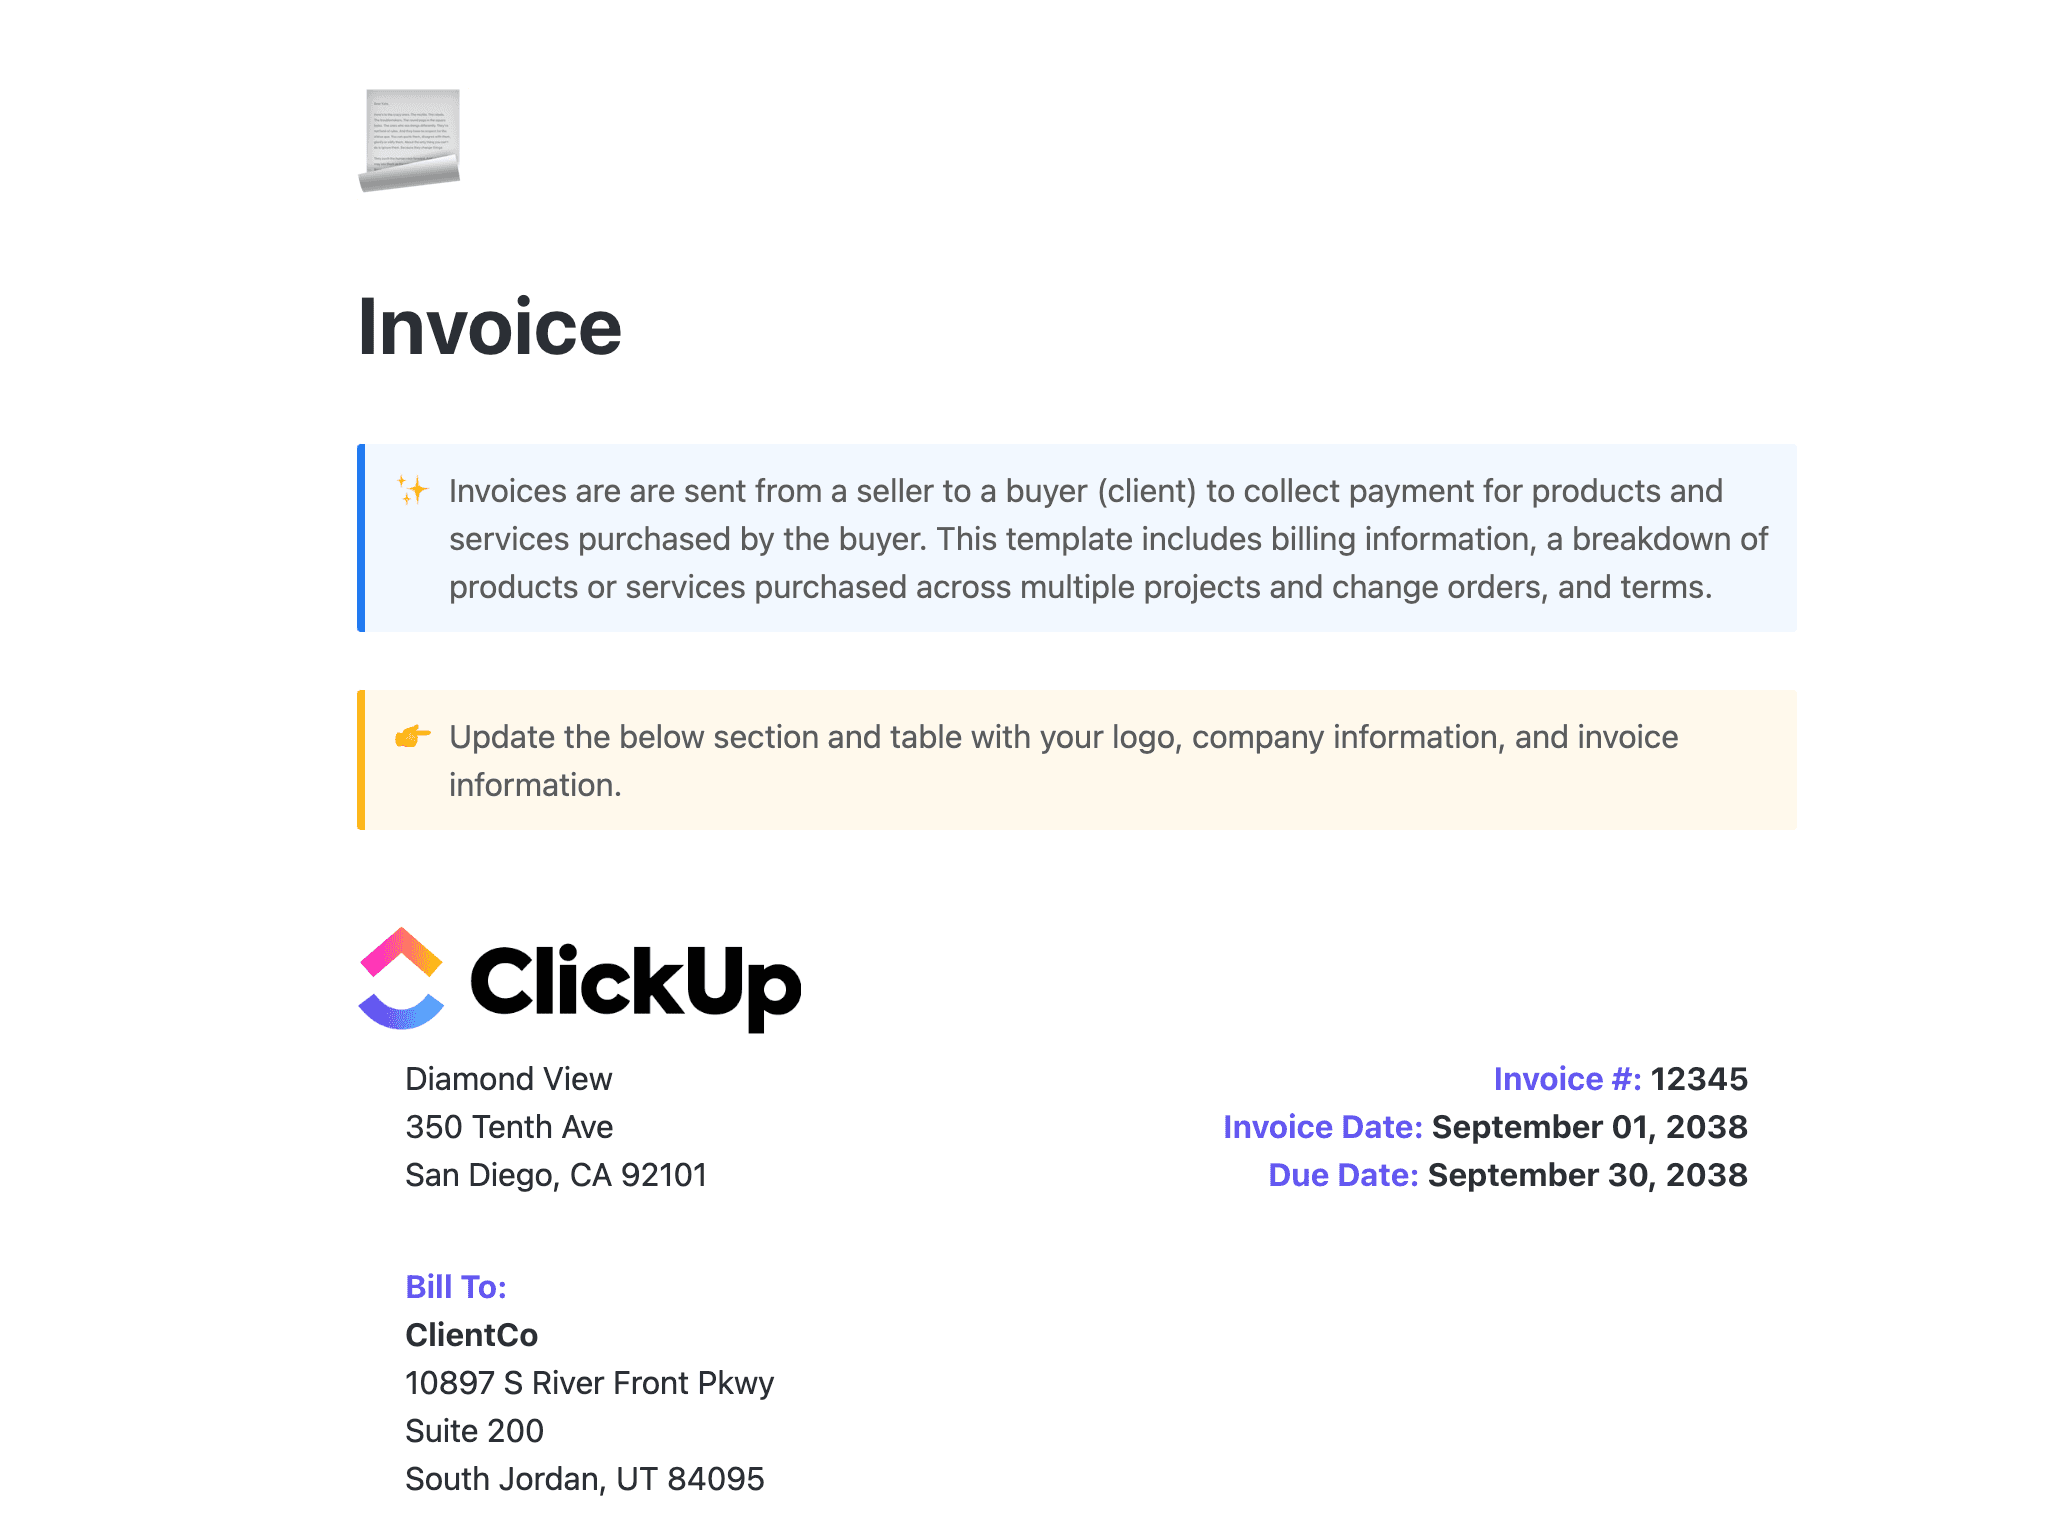 Invoices are are sent from a seller to a buyer (client) to collect payment for products and services purchased by the buyer. This template includes billing information, a breakdown of products or services purchased across multiple projects and change orders, and terms.